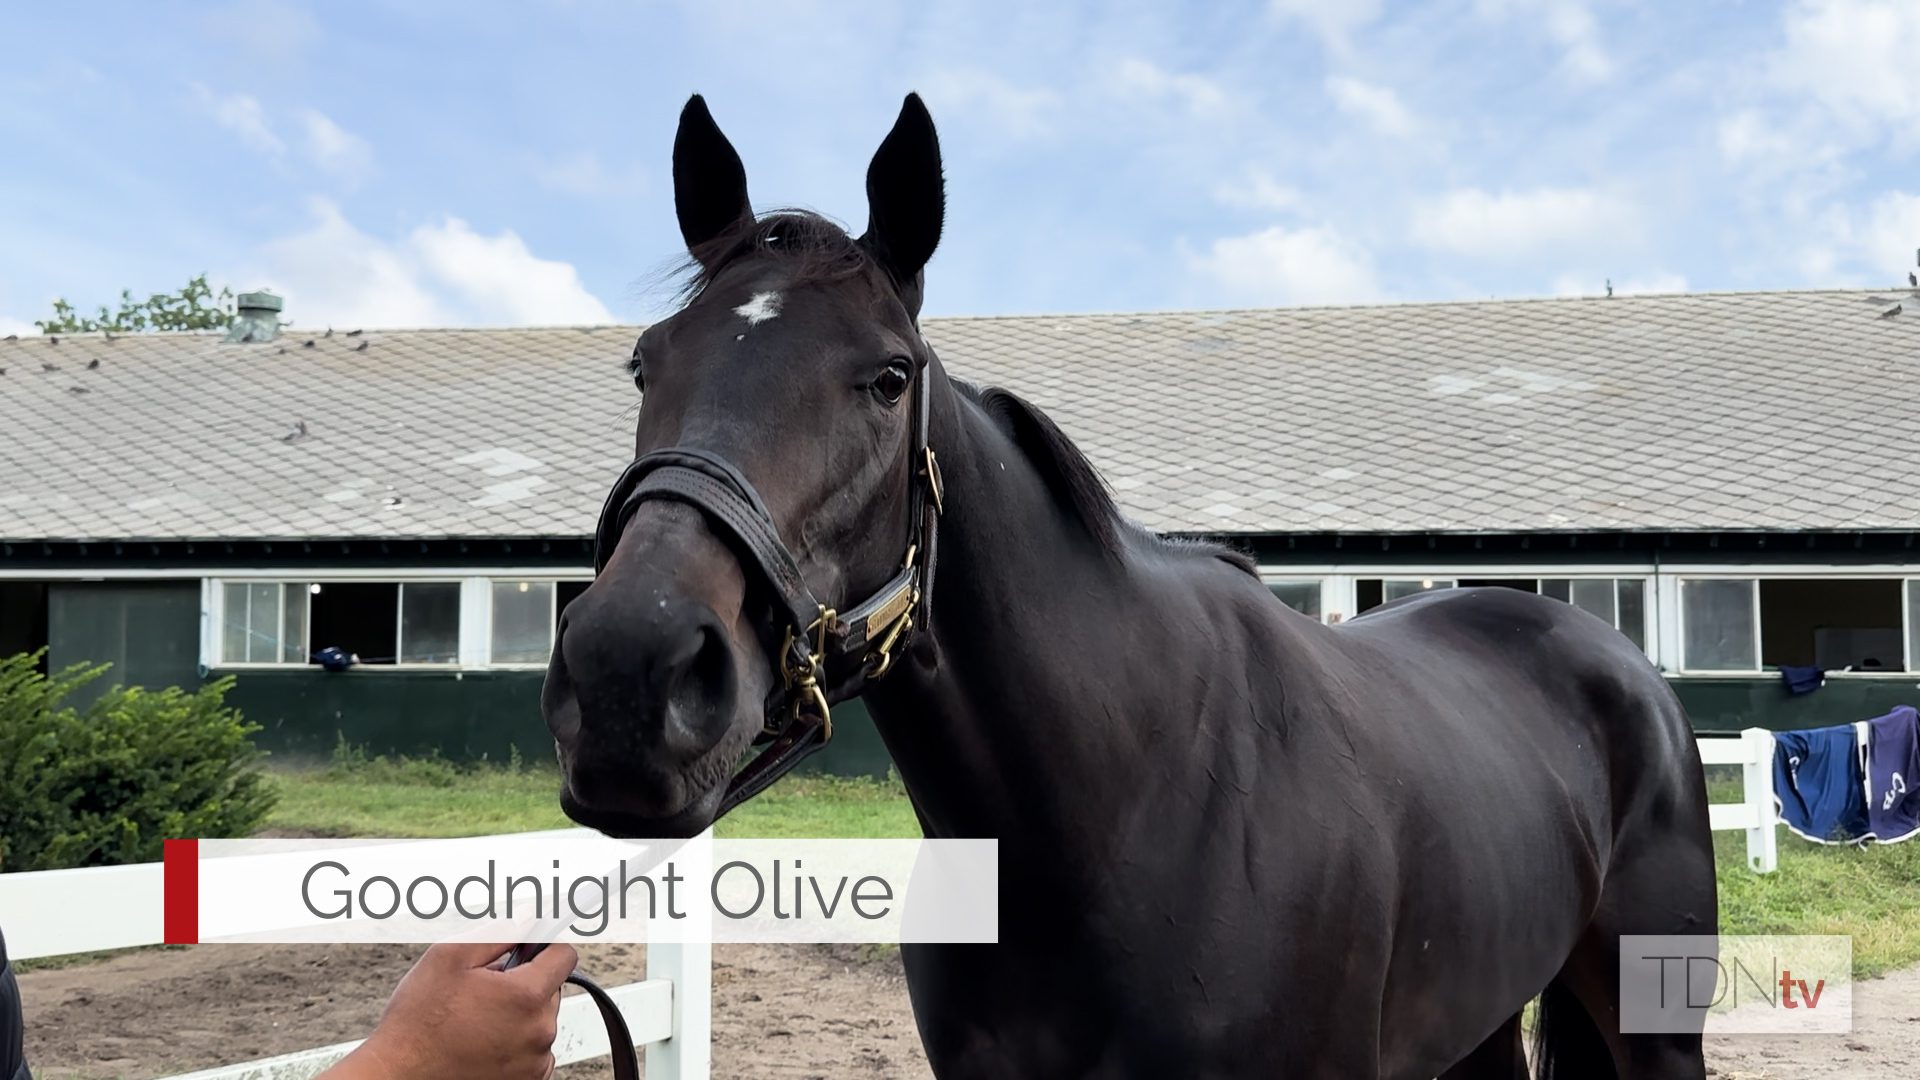 Goodnight Olive defies the odds in an award-winning career